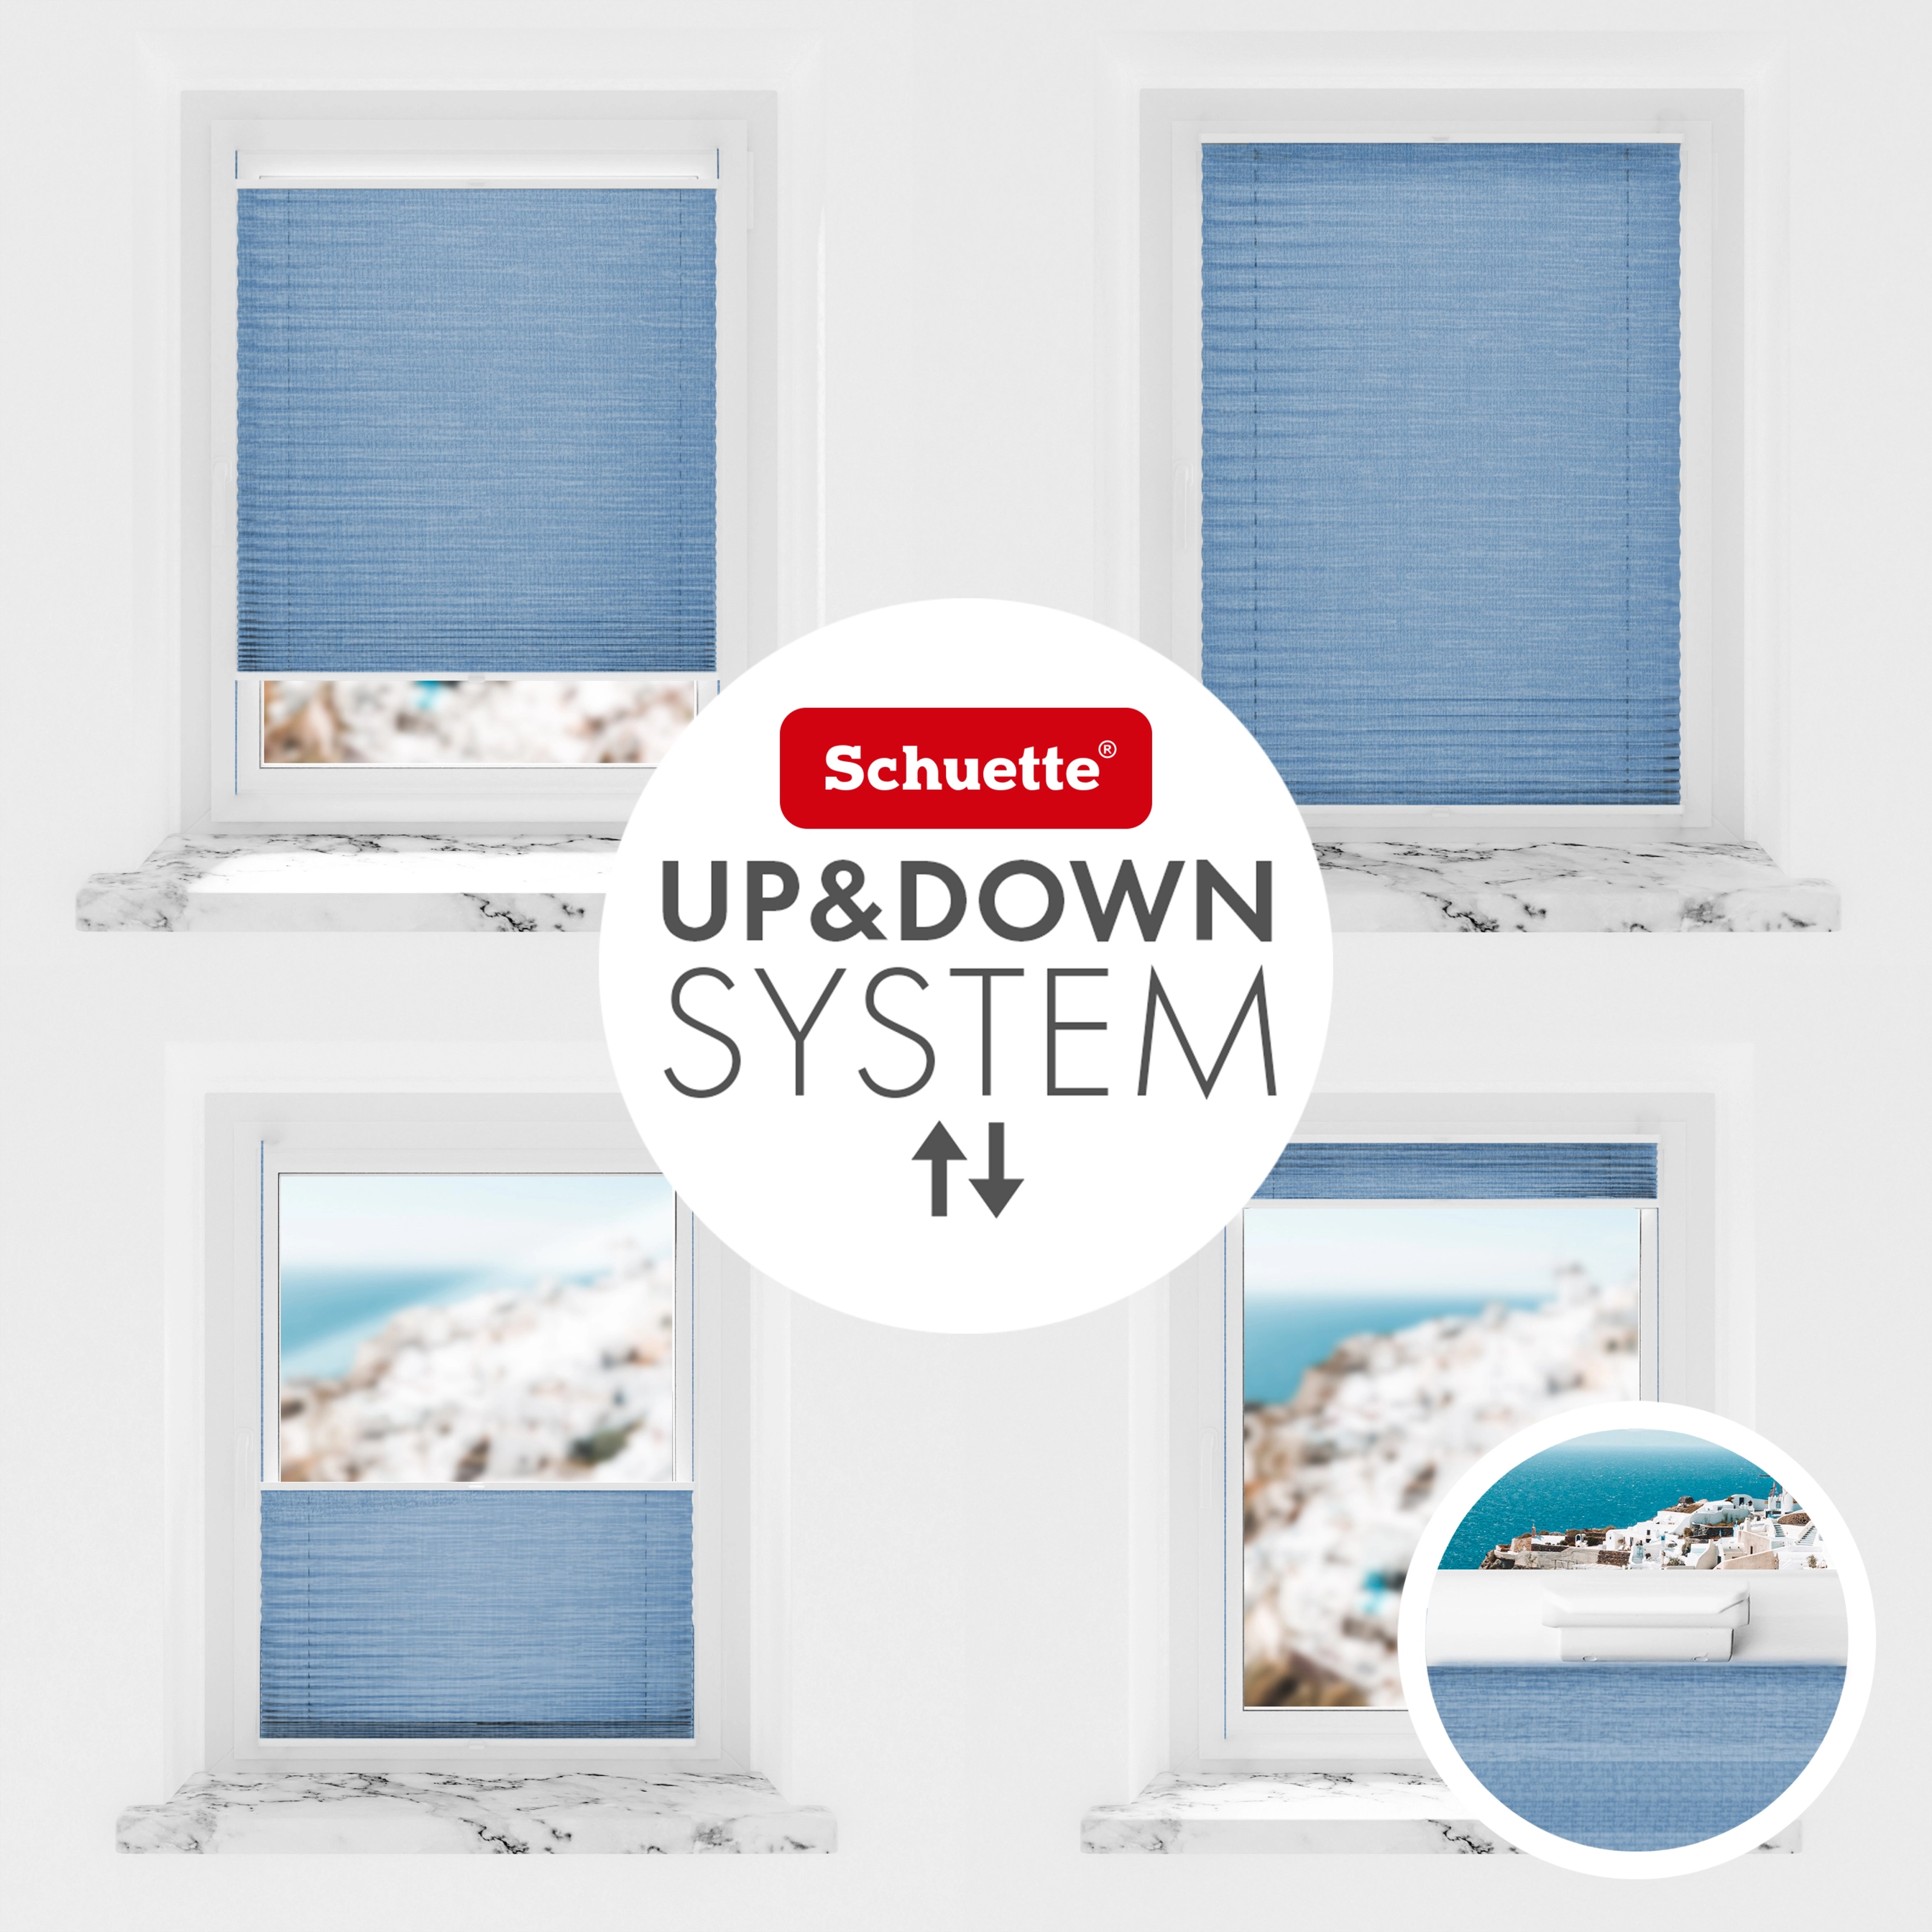 Schuette® Pleated Blind Made to Measure without Drilling • Suprafix Clamp holder “Incognito" Standard” • Melange Collection: Deep Sea (Blue) • Profile Colour: White